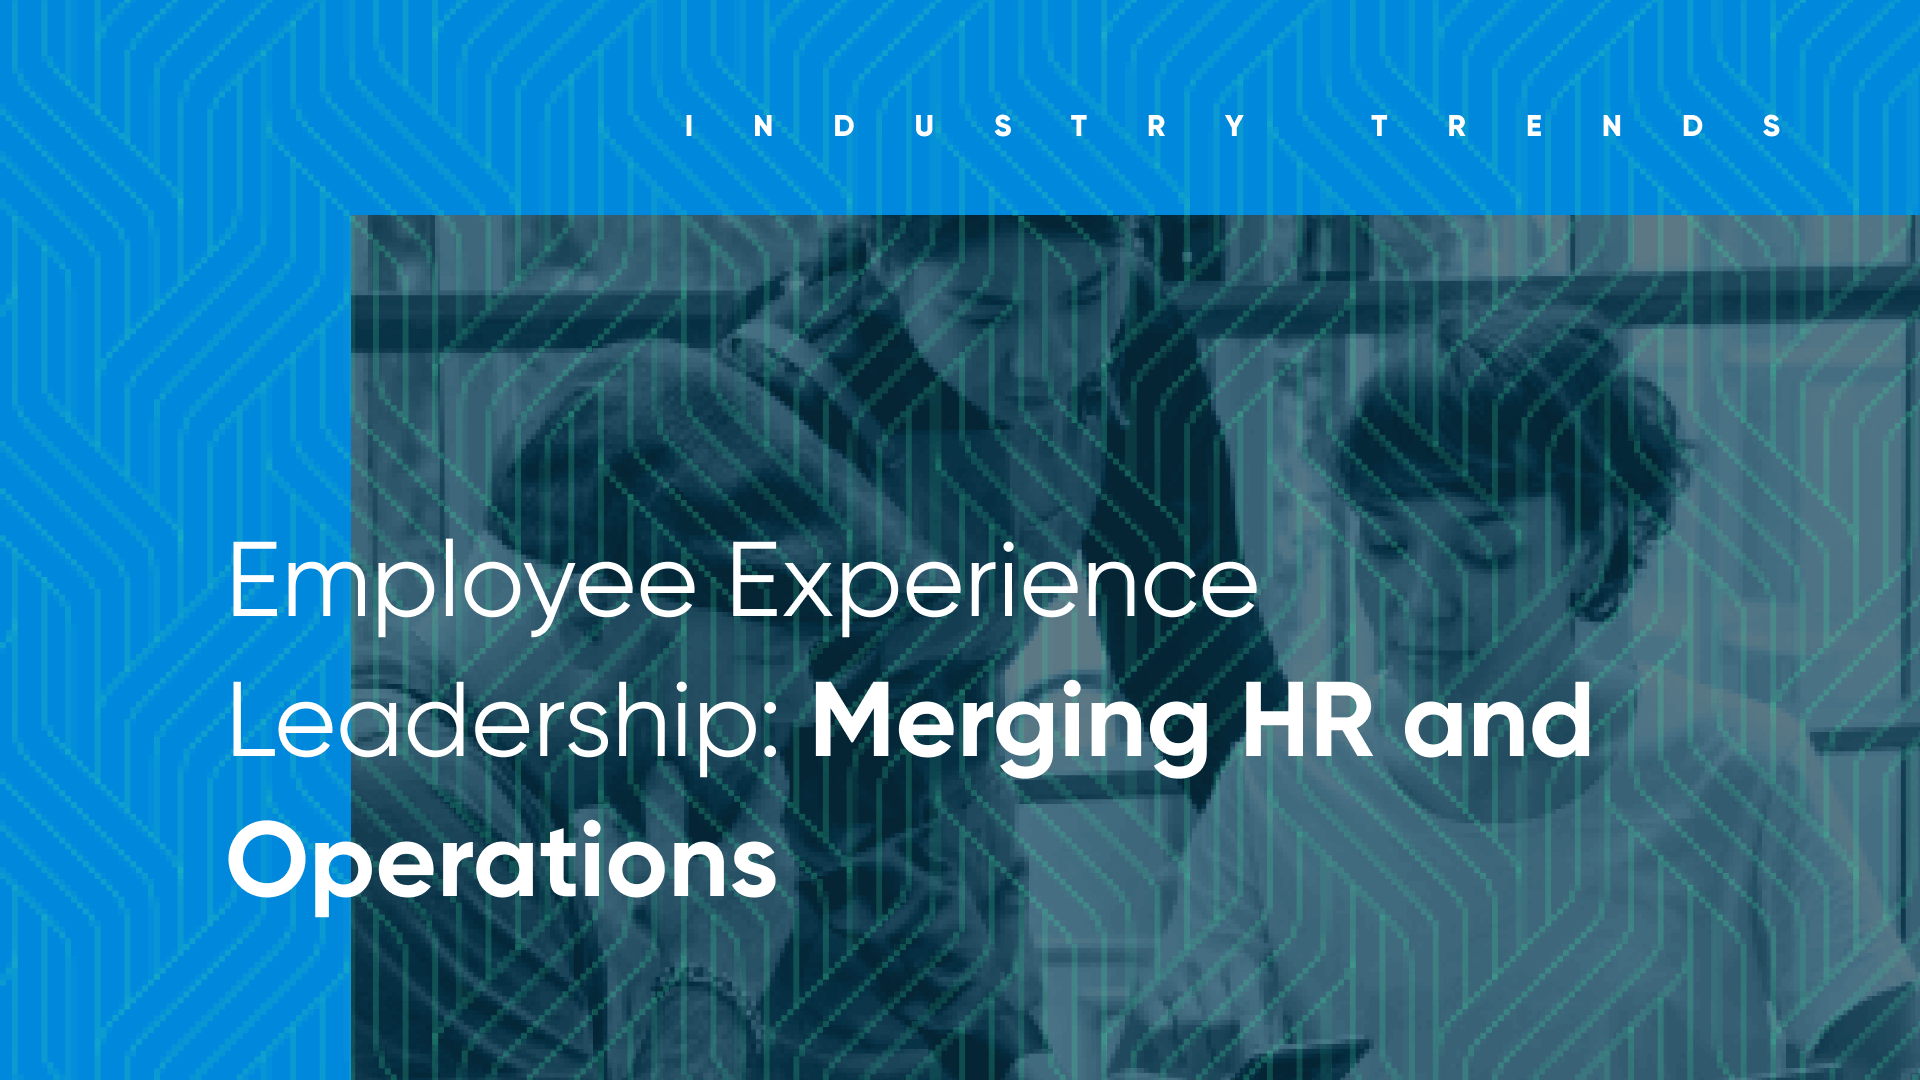 hospitality employee experience is improved by merging HR and Operations